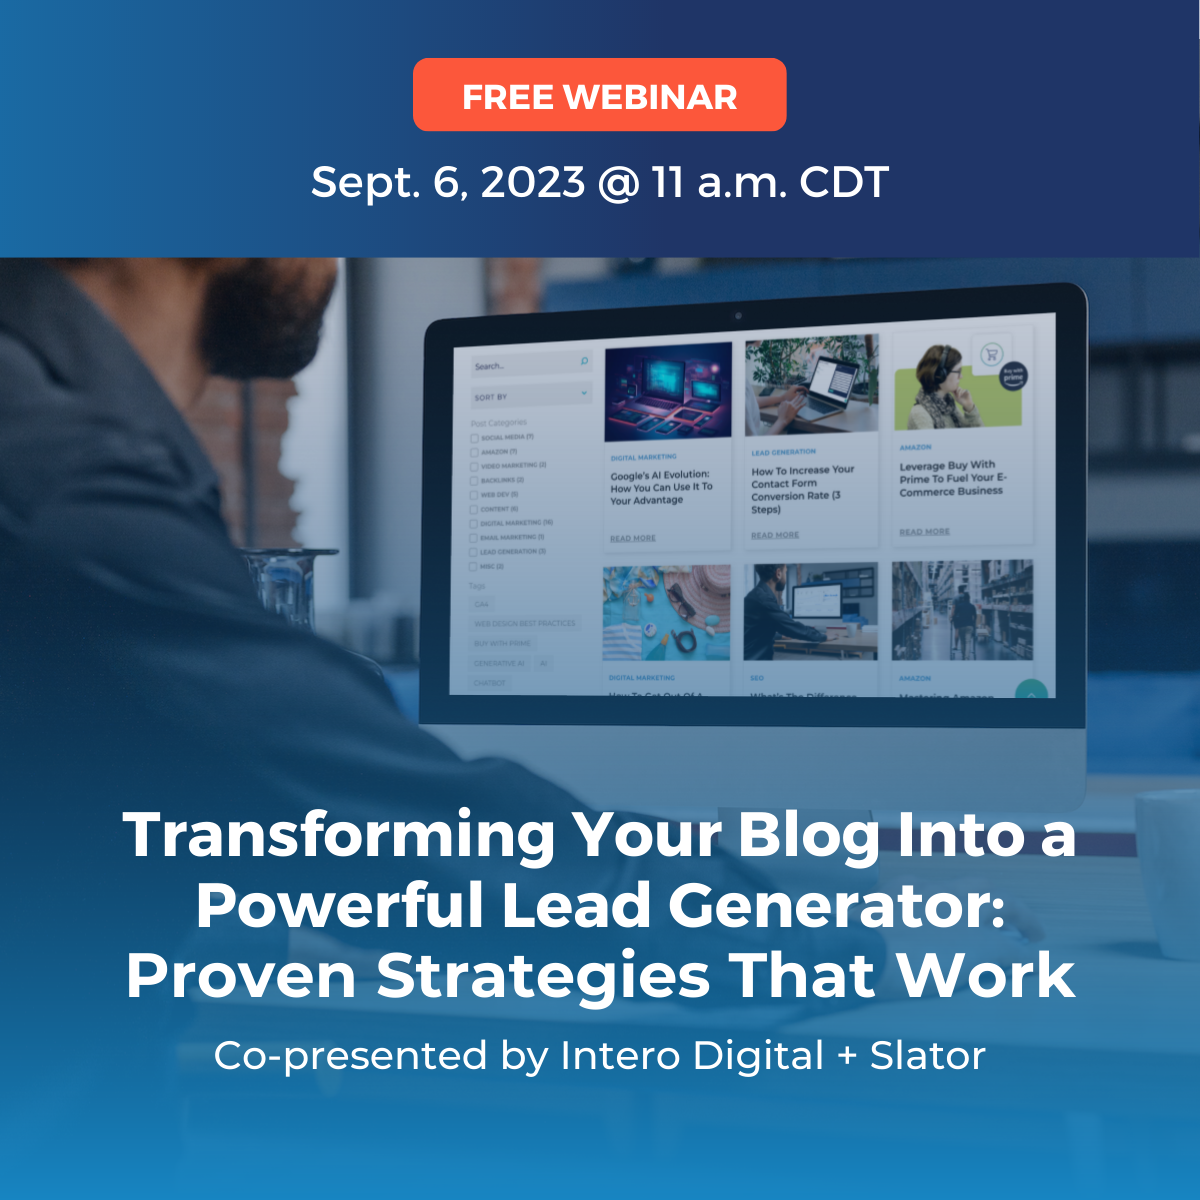 WEBINAR Transforming Your Blog Into a Powerful Lead Generator: Proven Strategies That Work